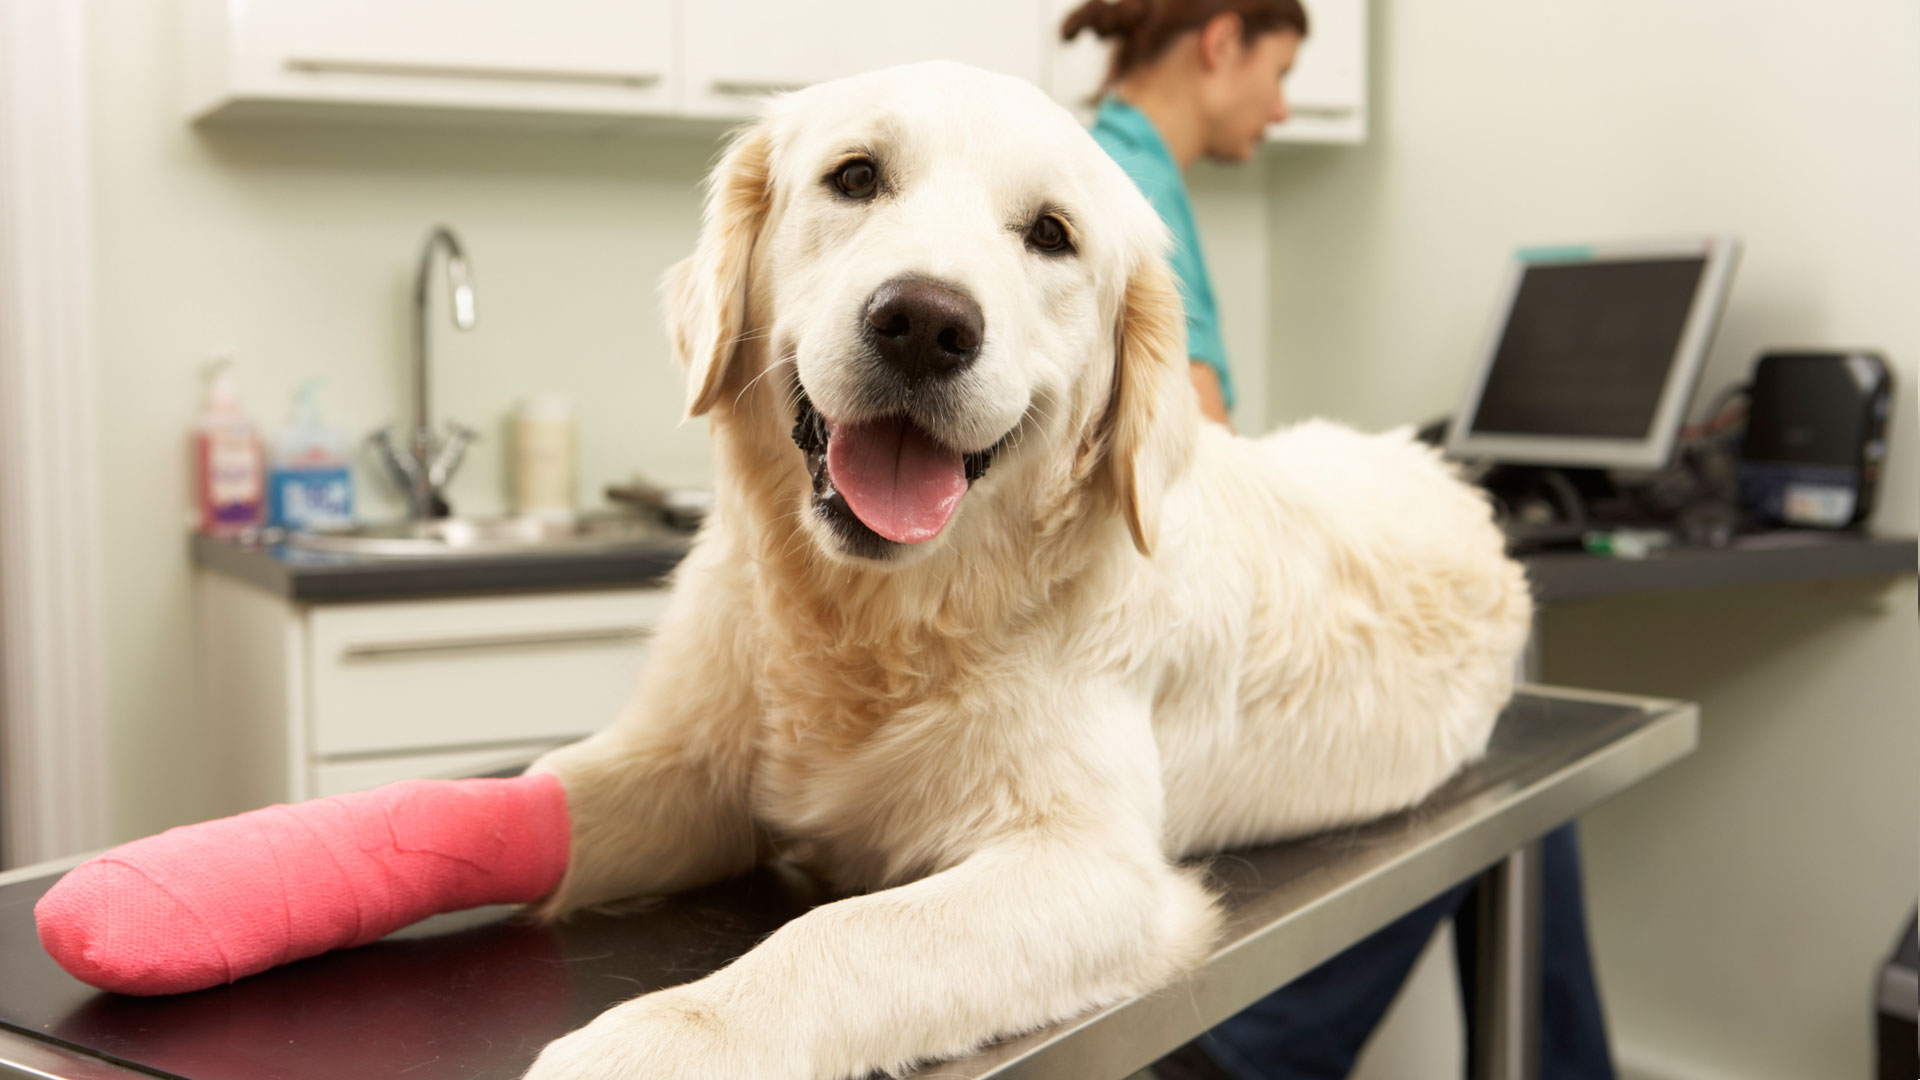 Why is it important to have pet insurance?